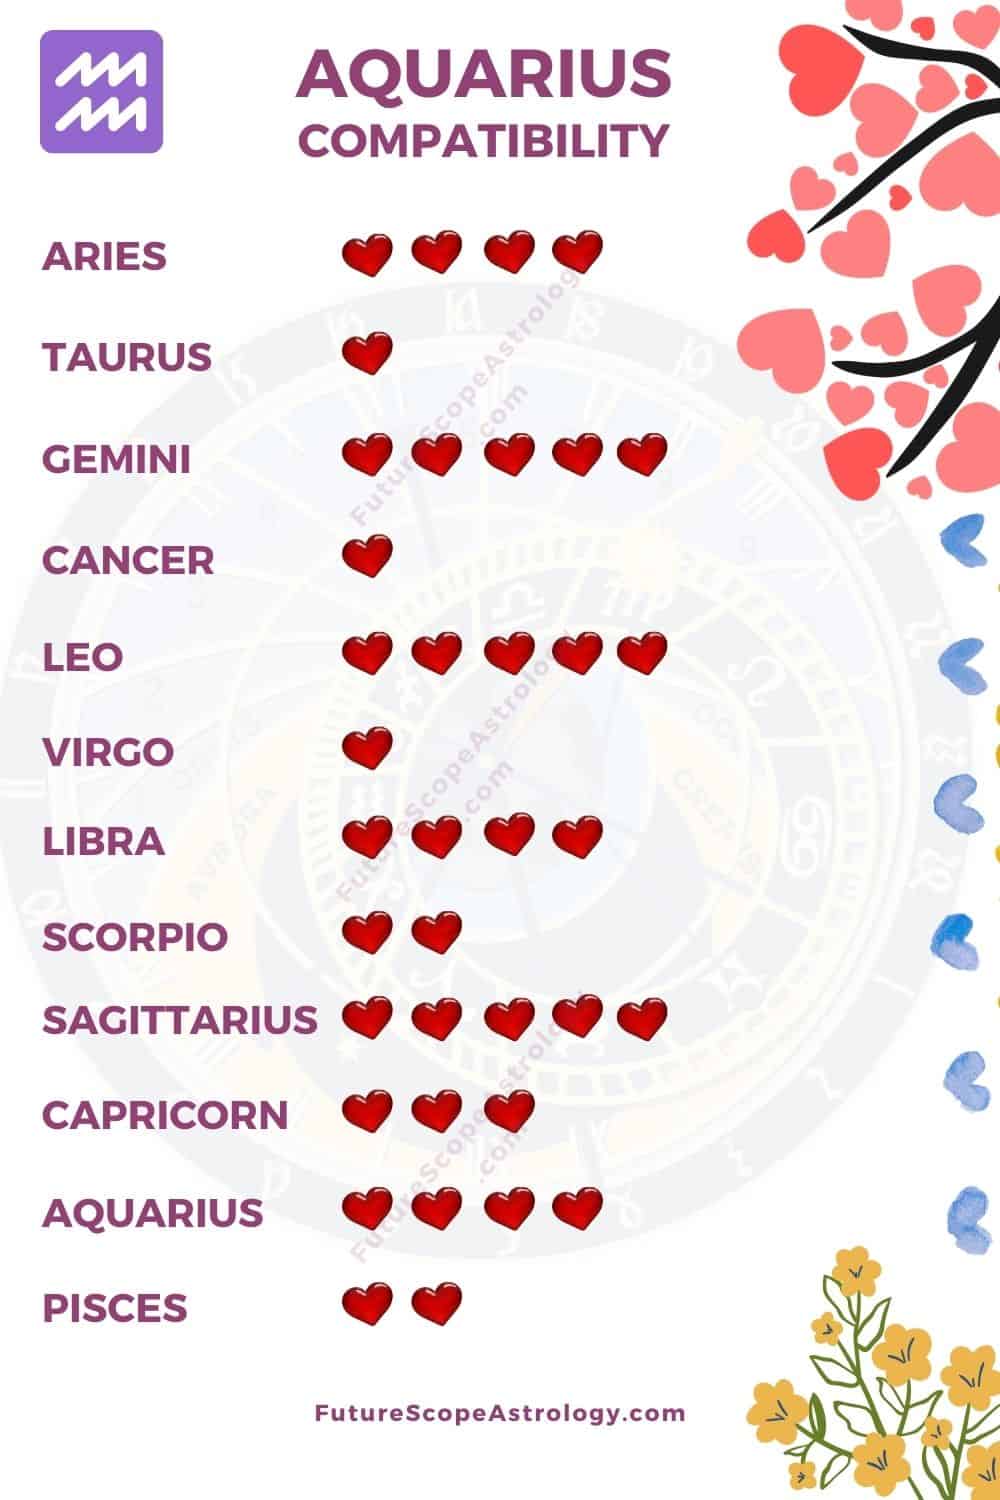 Aquarius Compatibility love, relationships (all you need to know